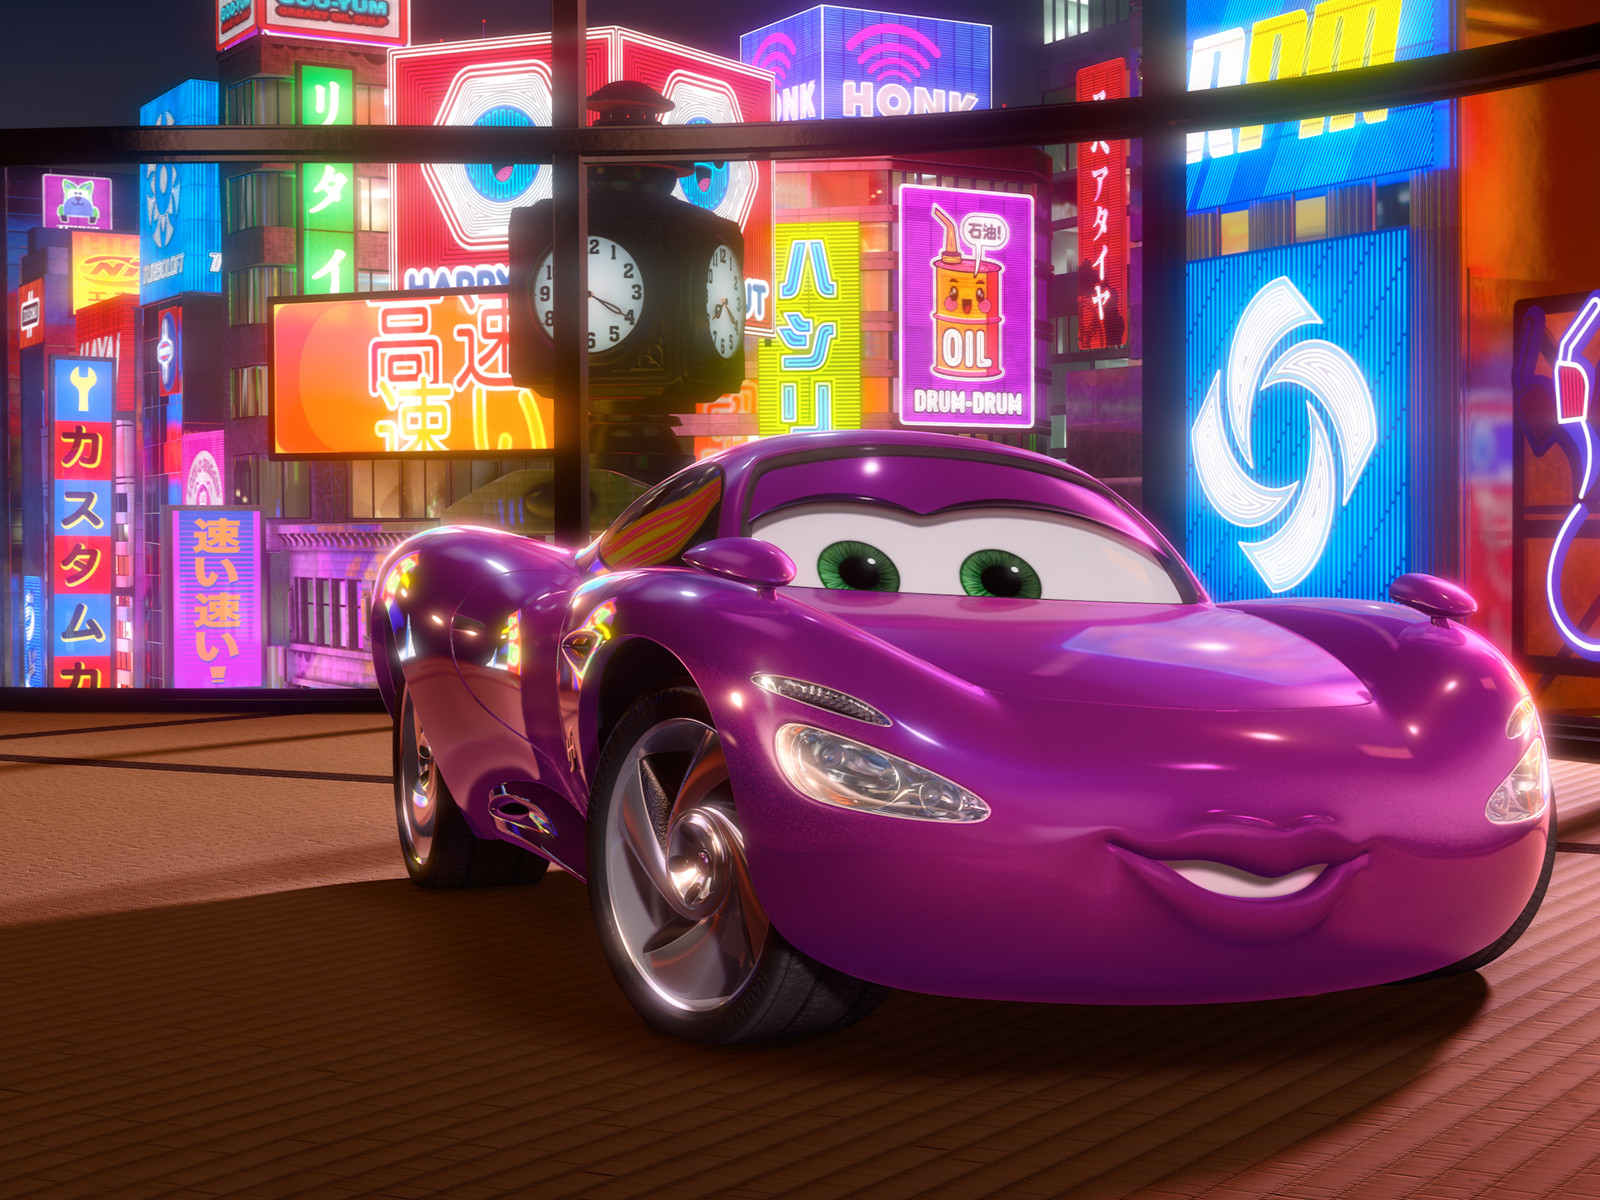 Holley Shiftwell In Cars 2 Movie - Car Cartoon Images Hd - 1600x1200  Wallpaper 